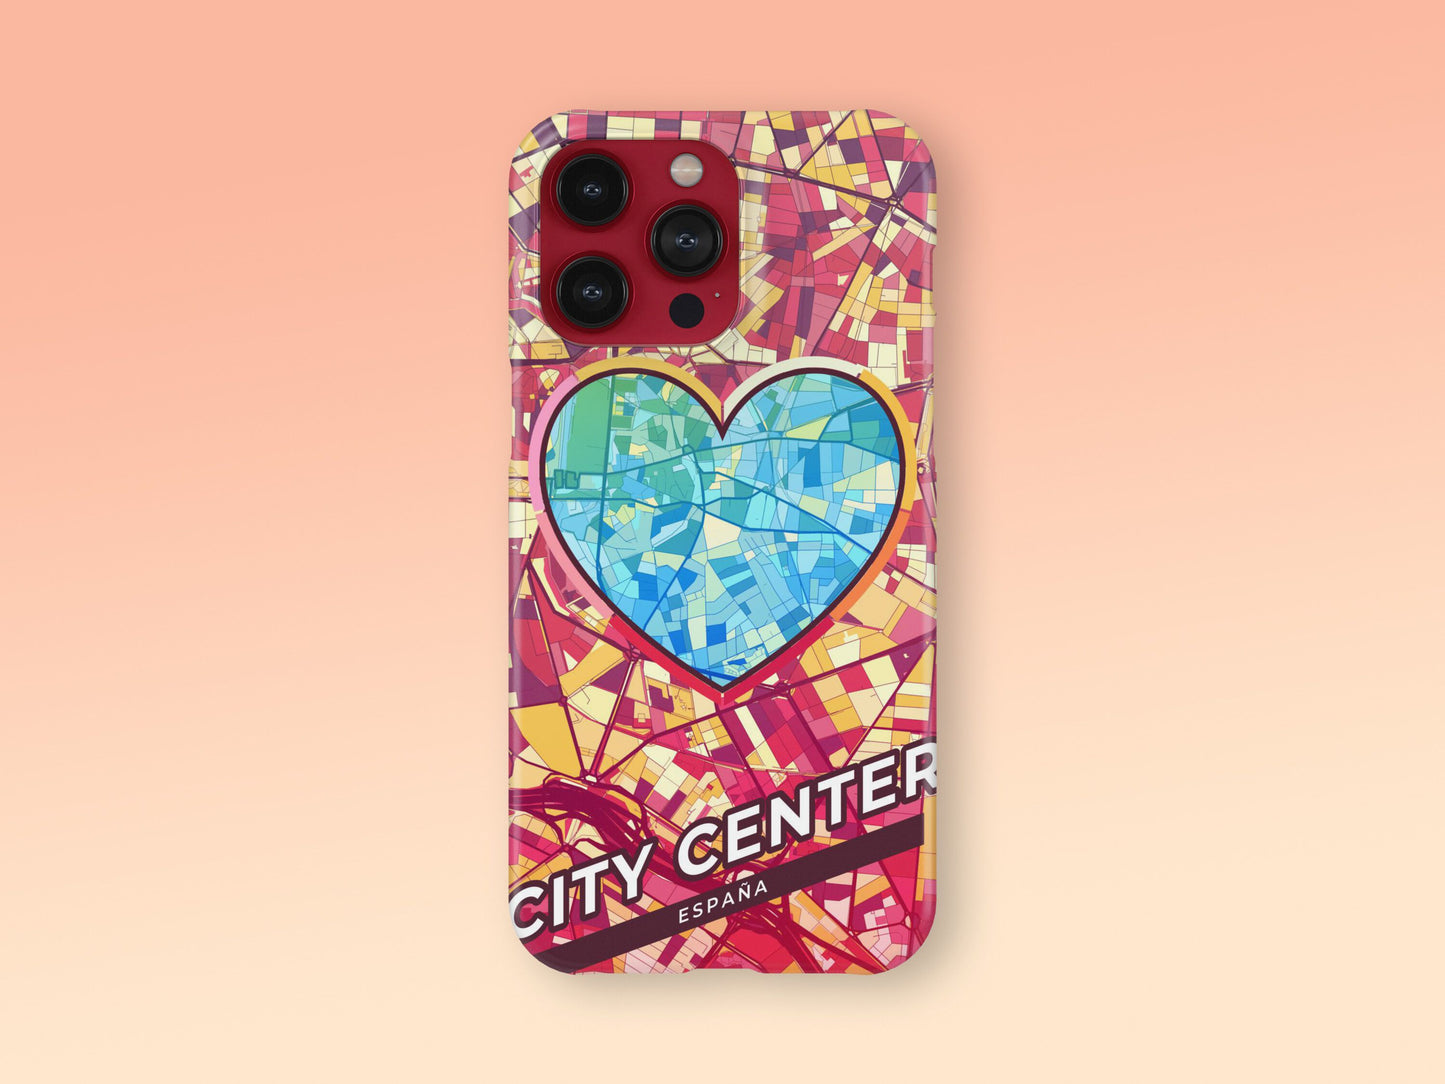 City Center Spain slim phone case with colorful icon. Birthday, wedding or housewarming gift. Couple match cases. 2